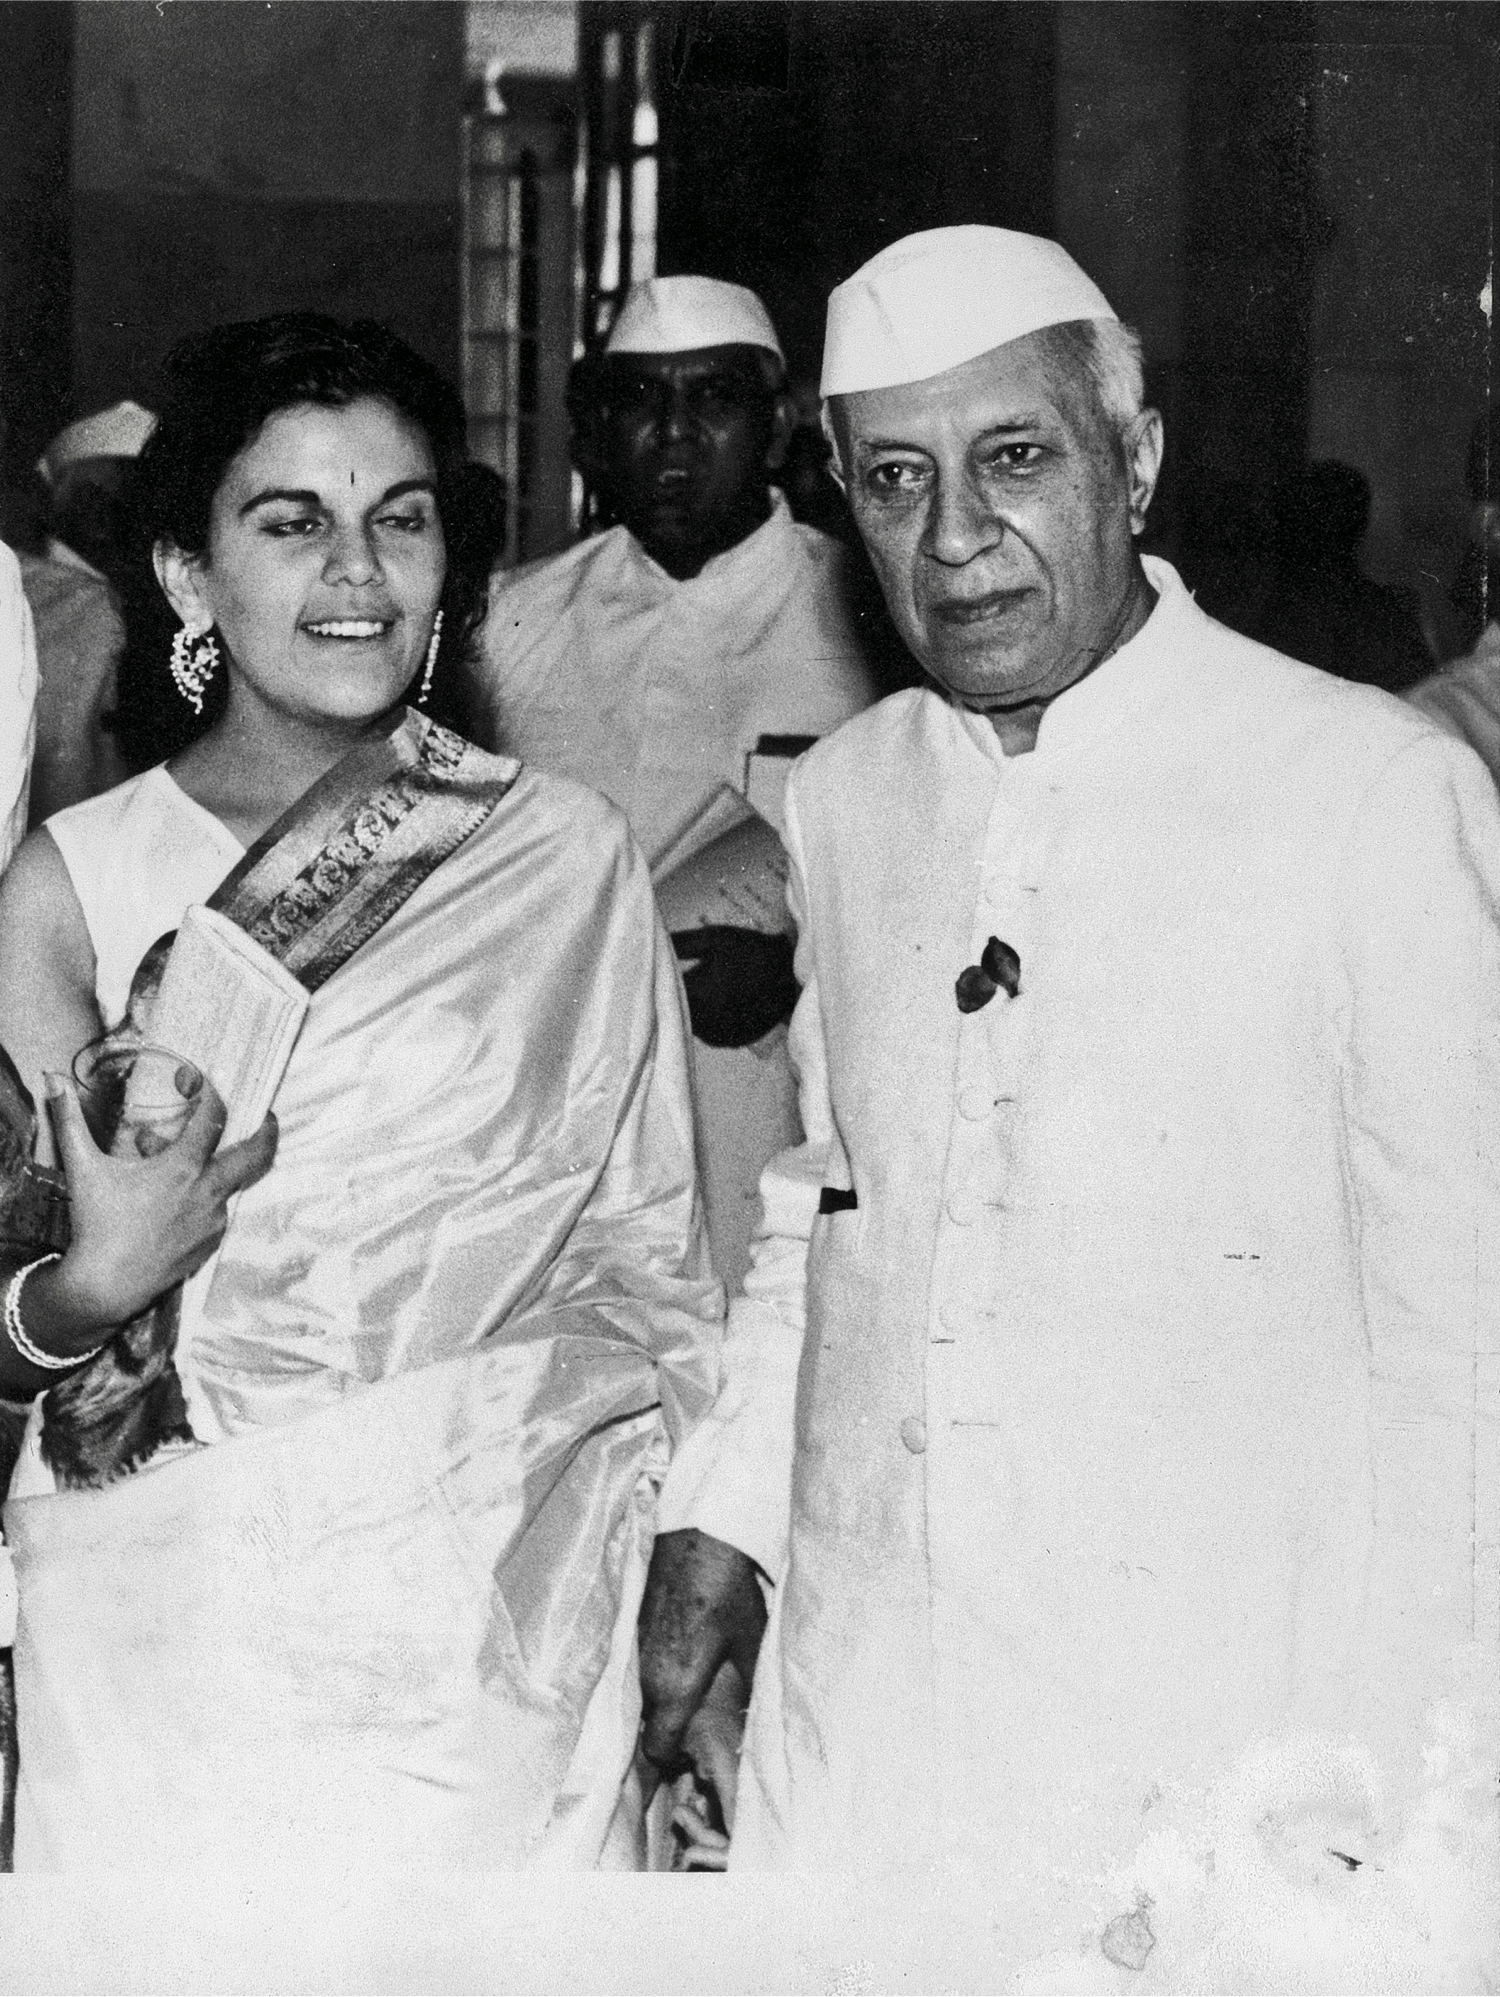 Sudha and Nehru at the &nbsp;Padma award ceremony, c. 1962 �